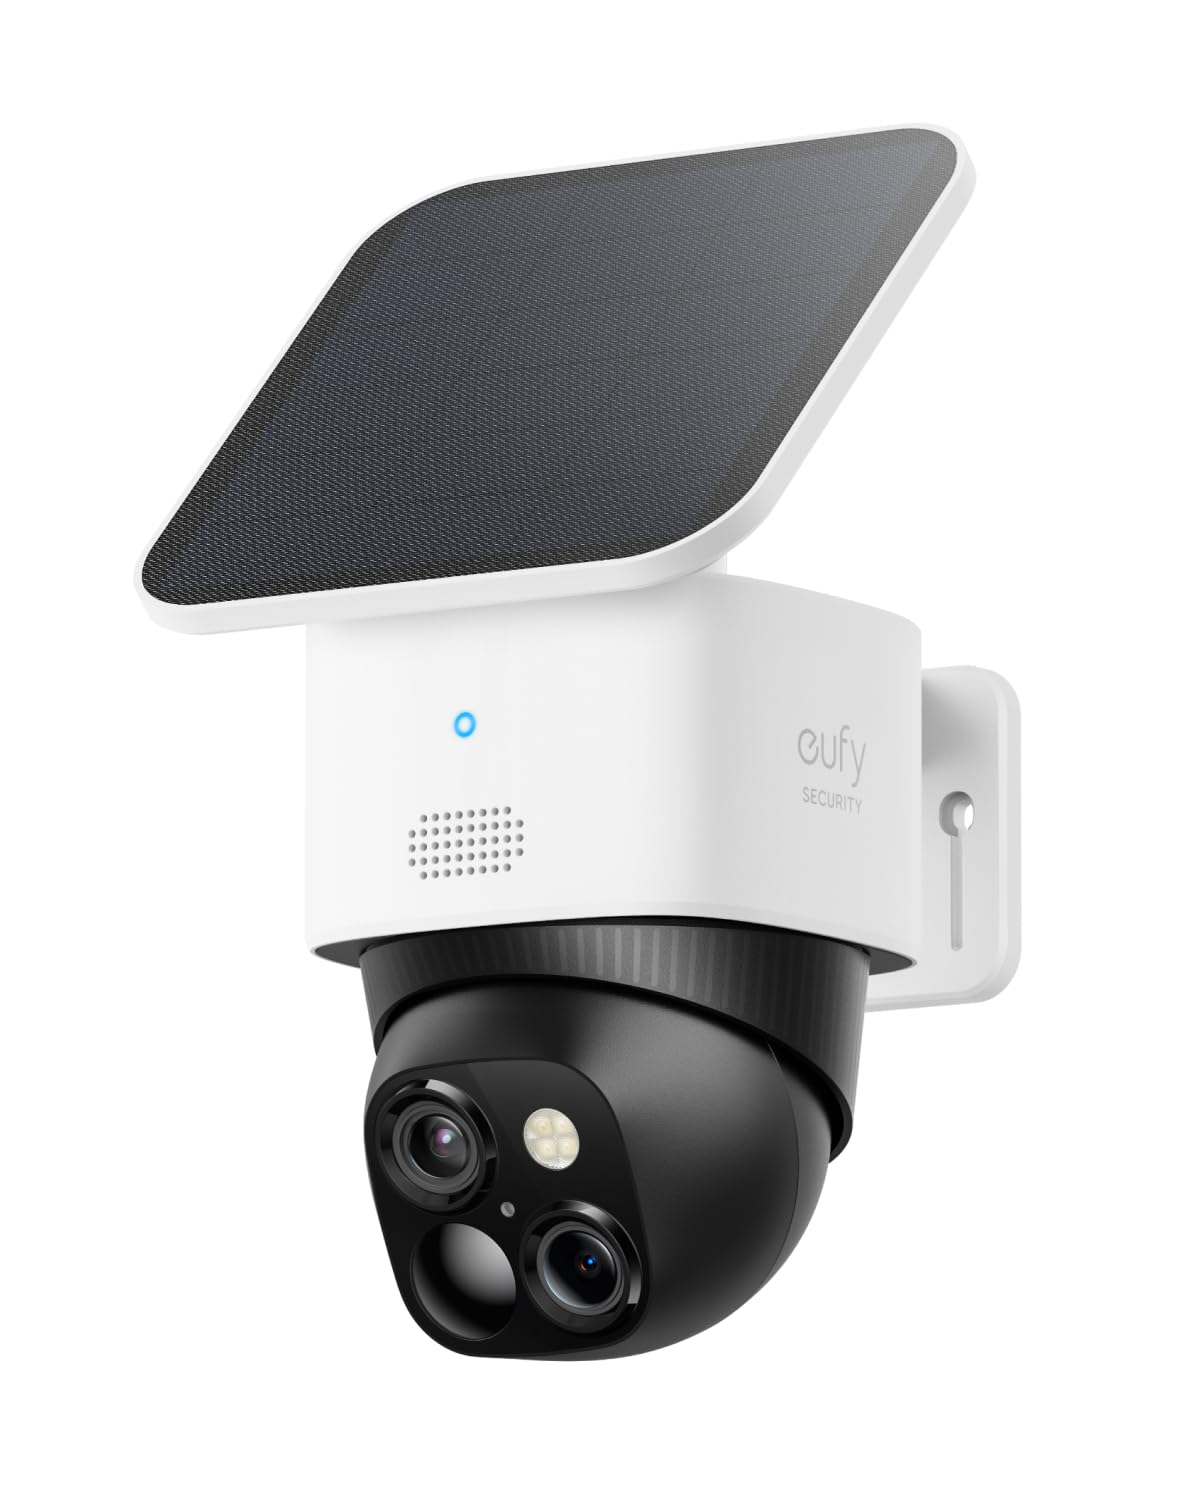 eufy Security SoloCam S340 Solar Powered Security Camera + $15 Gift Card $150 + Free Shipping